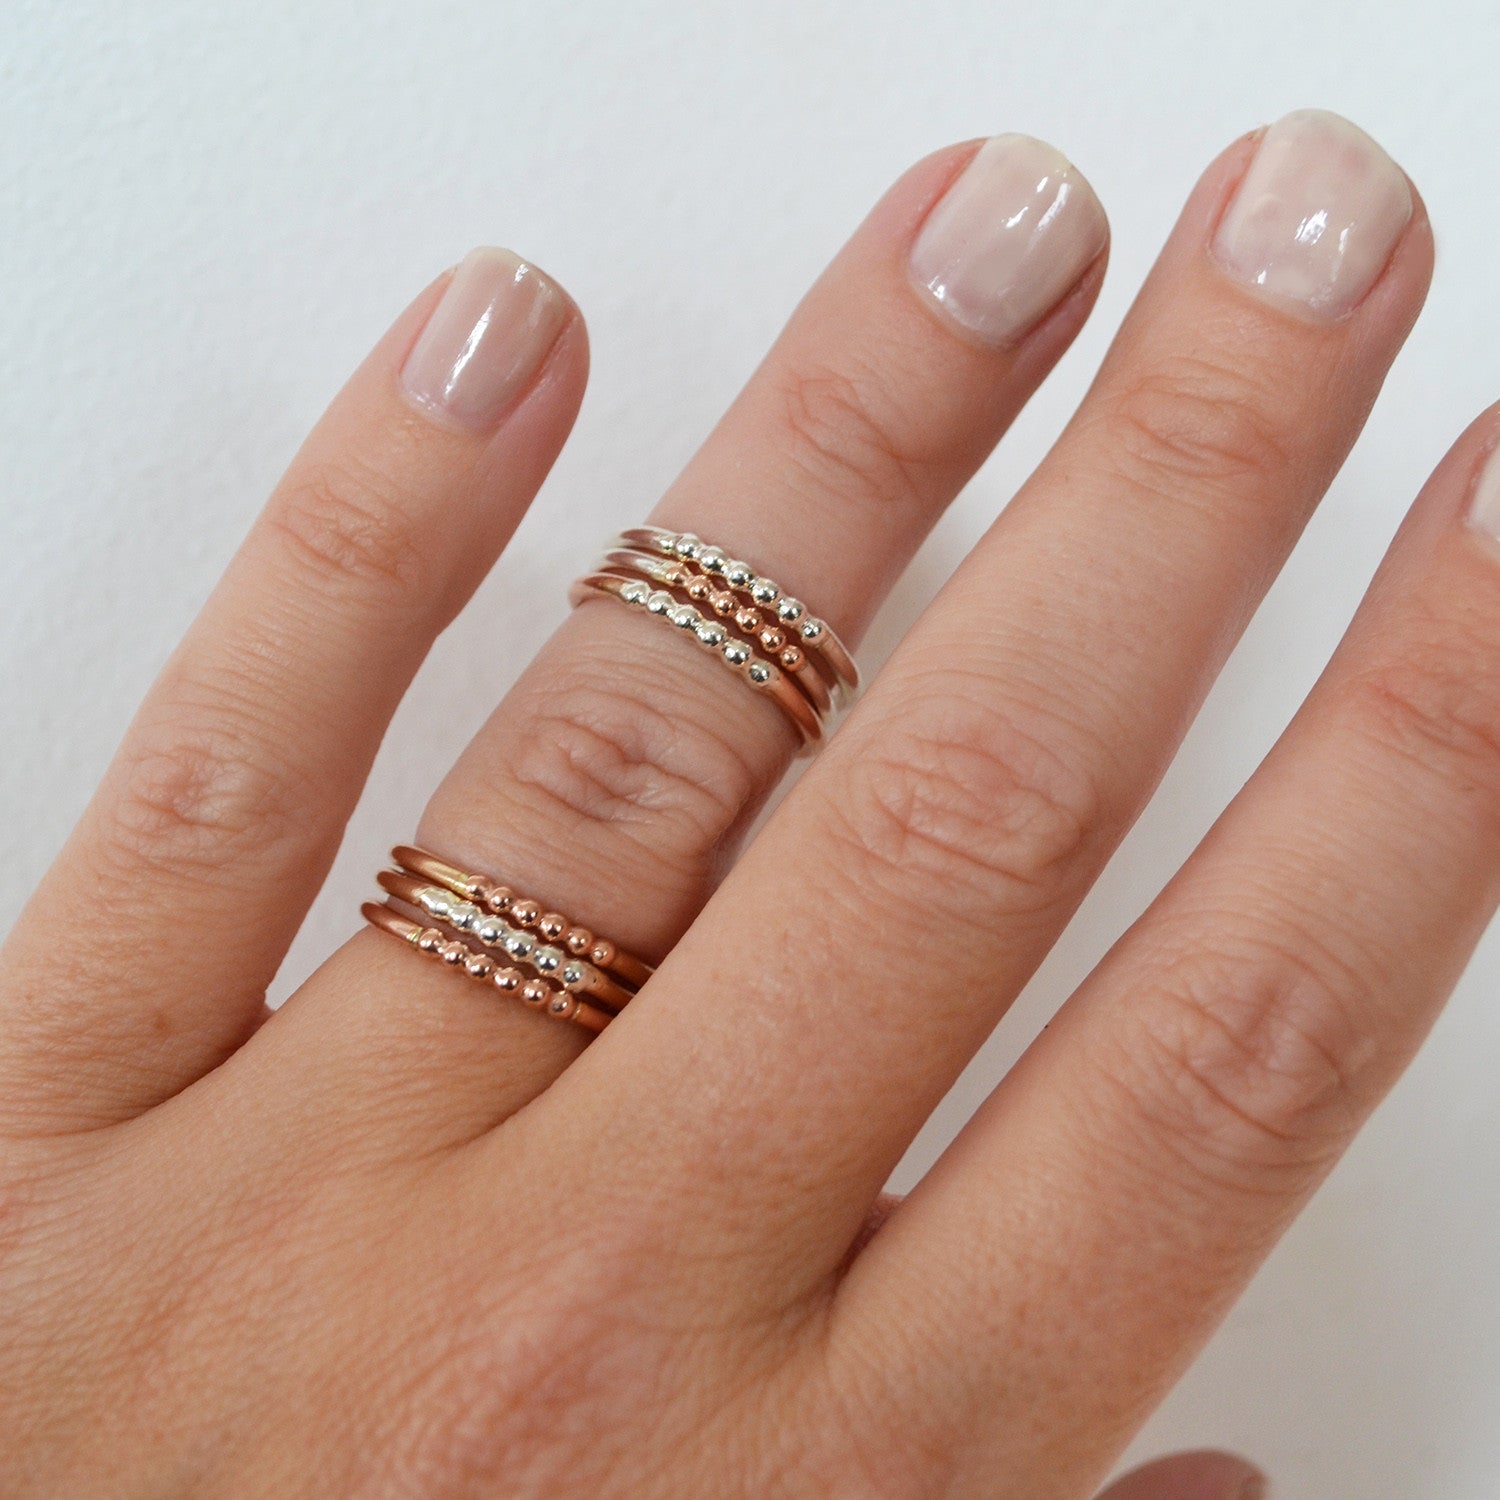 Beaded Accent Ring, Gold, Rose Gold, or Sterling Silver